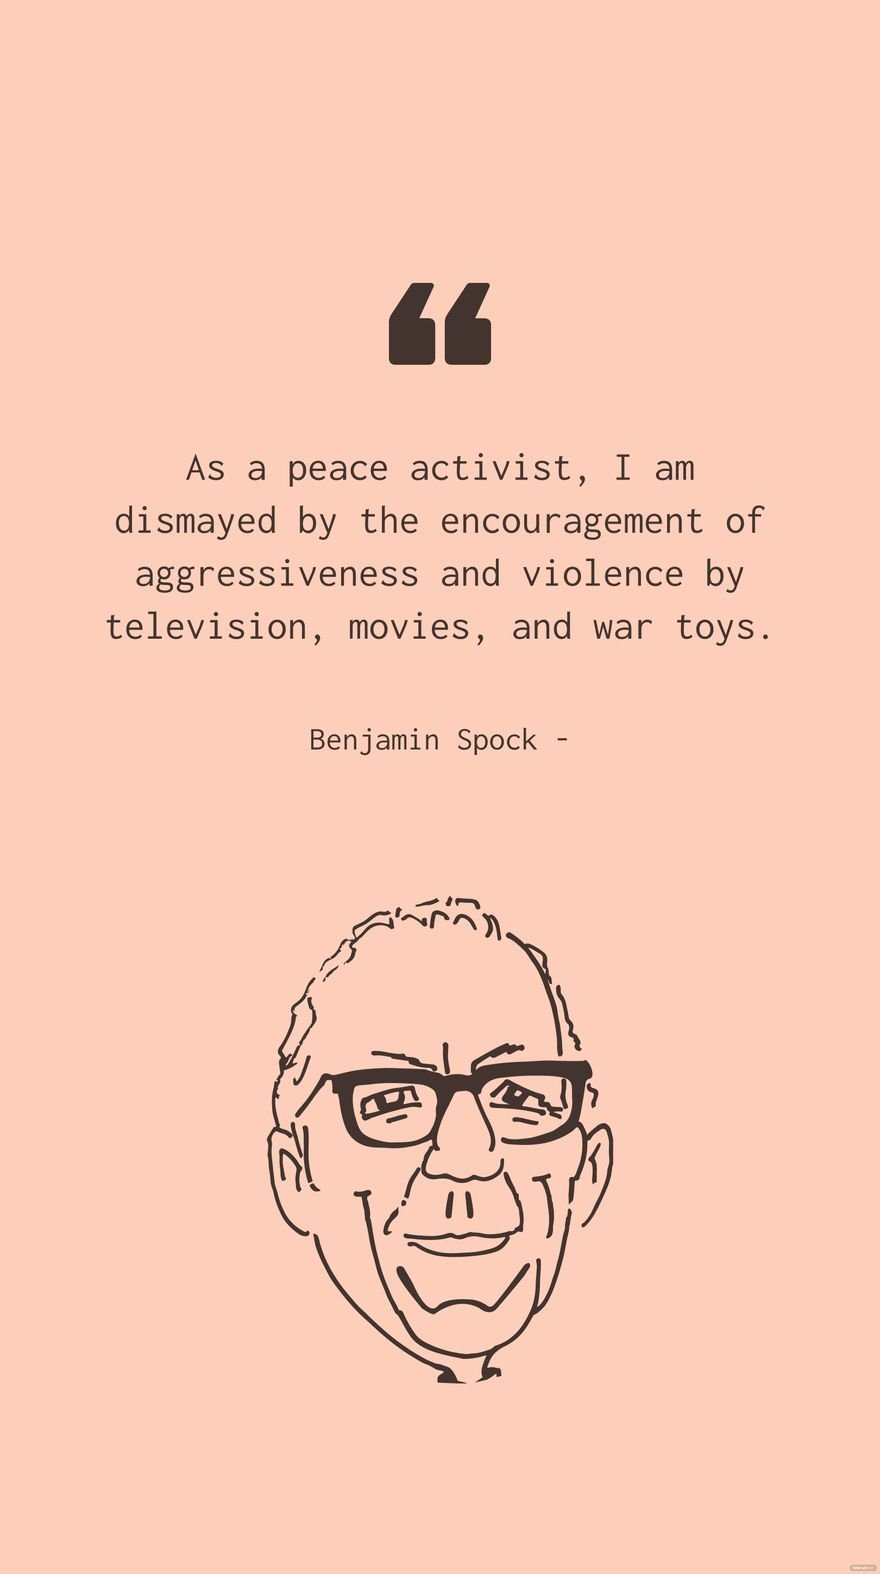 Free Benjamin Spock - As a peace activist, I am dismayed by the encouragement of aggressiveness and violence by television, movies, and war toys. in JPG